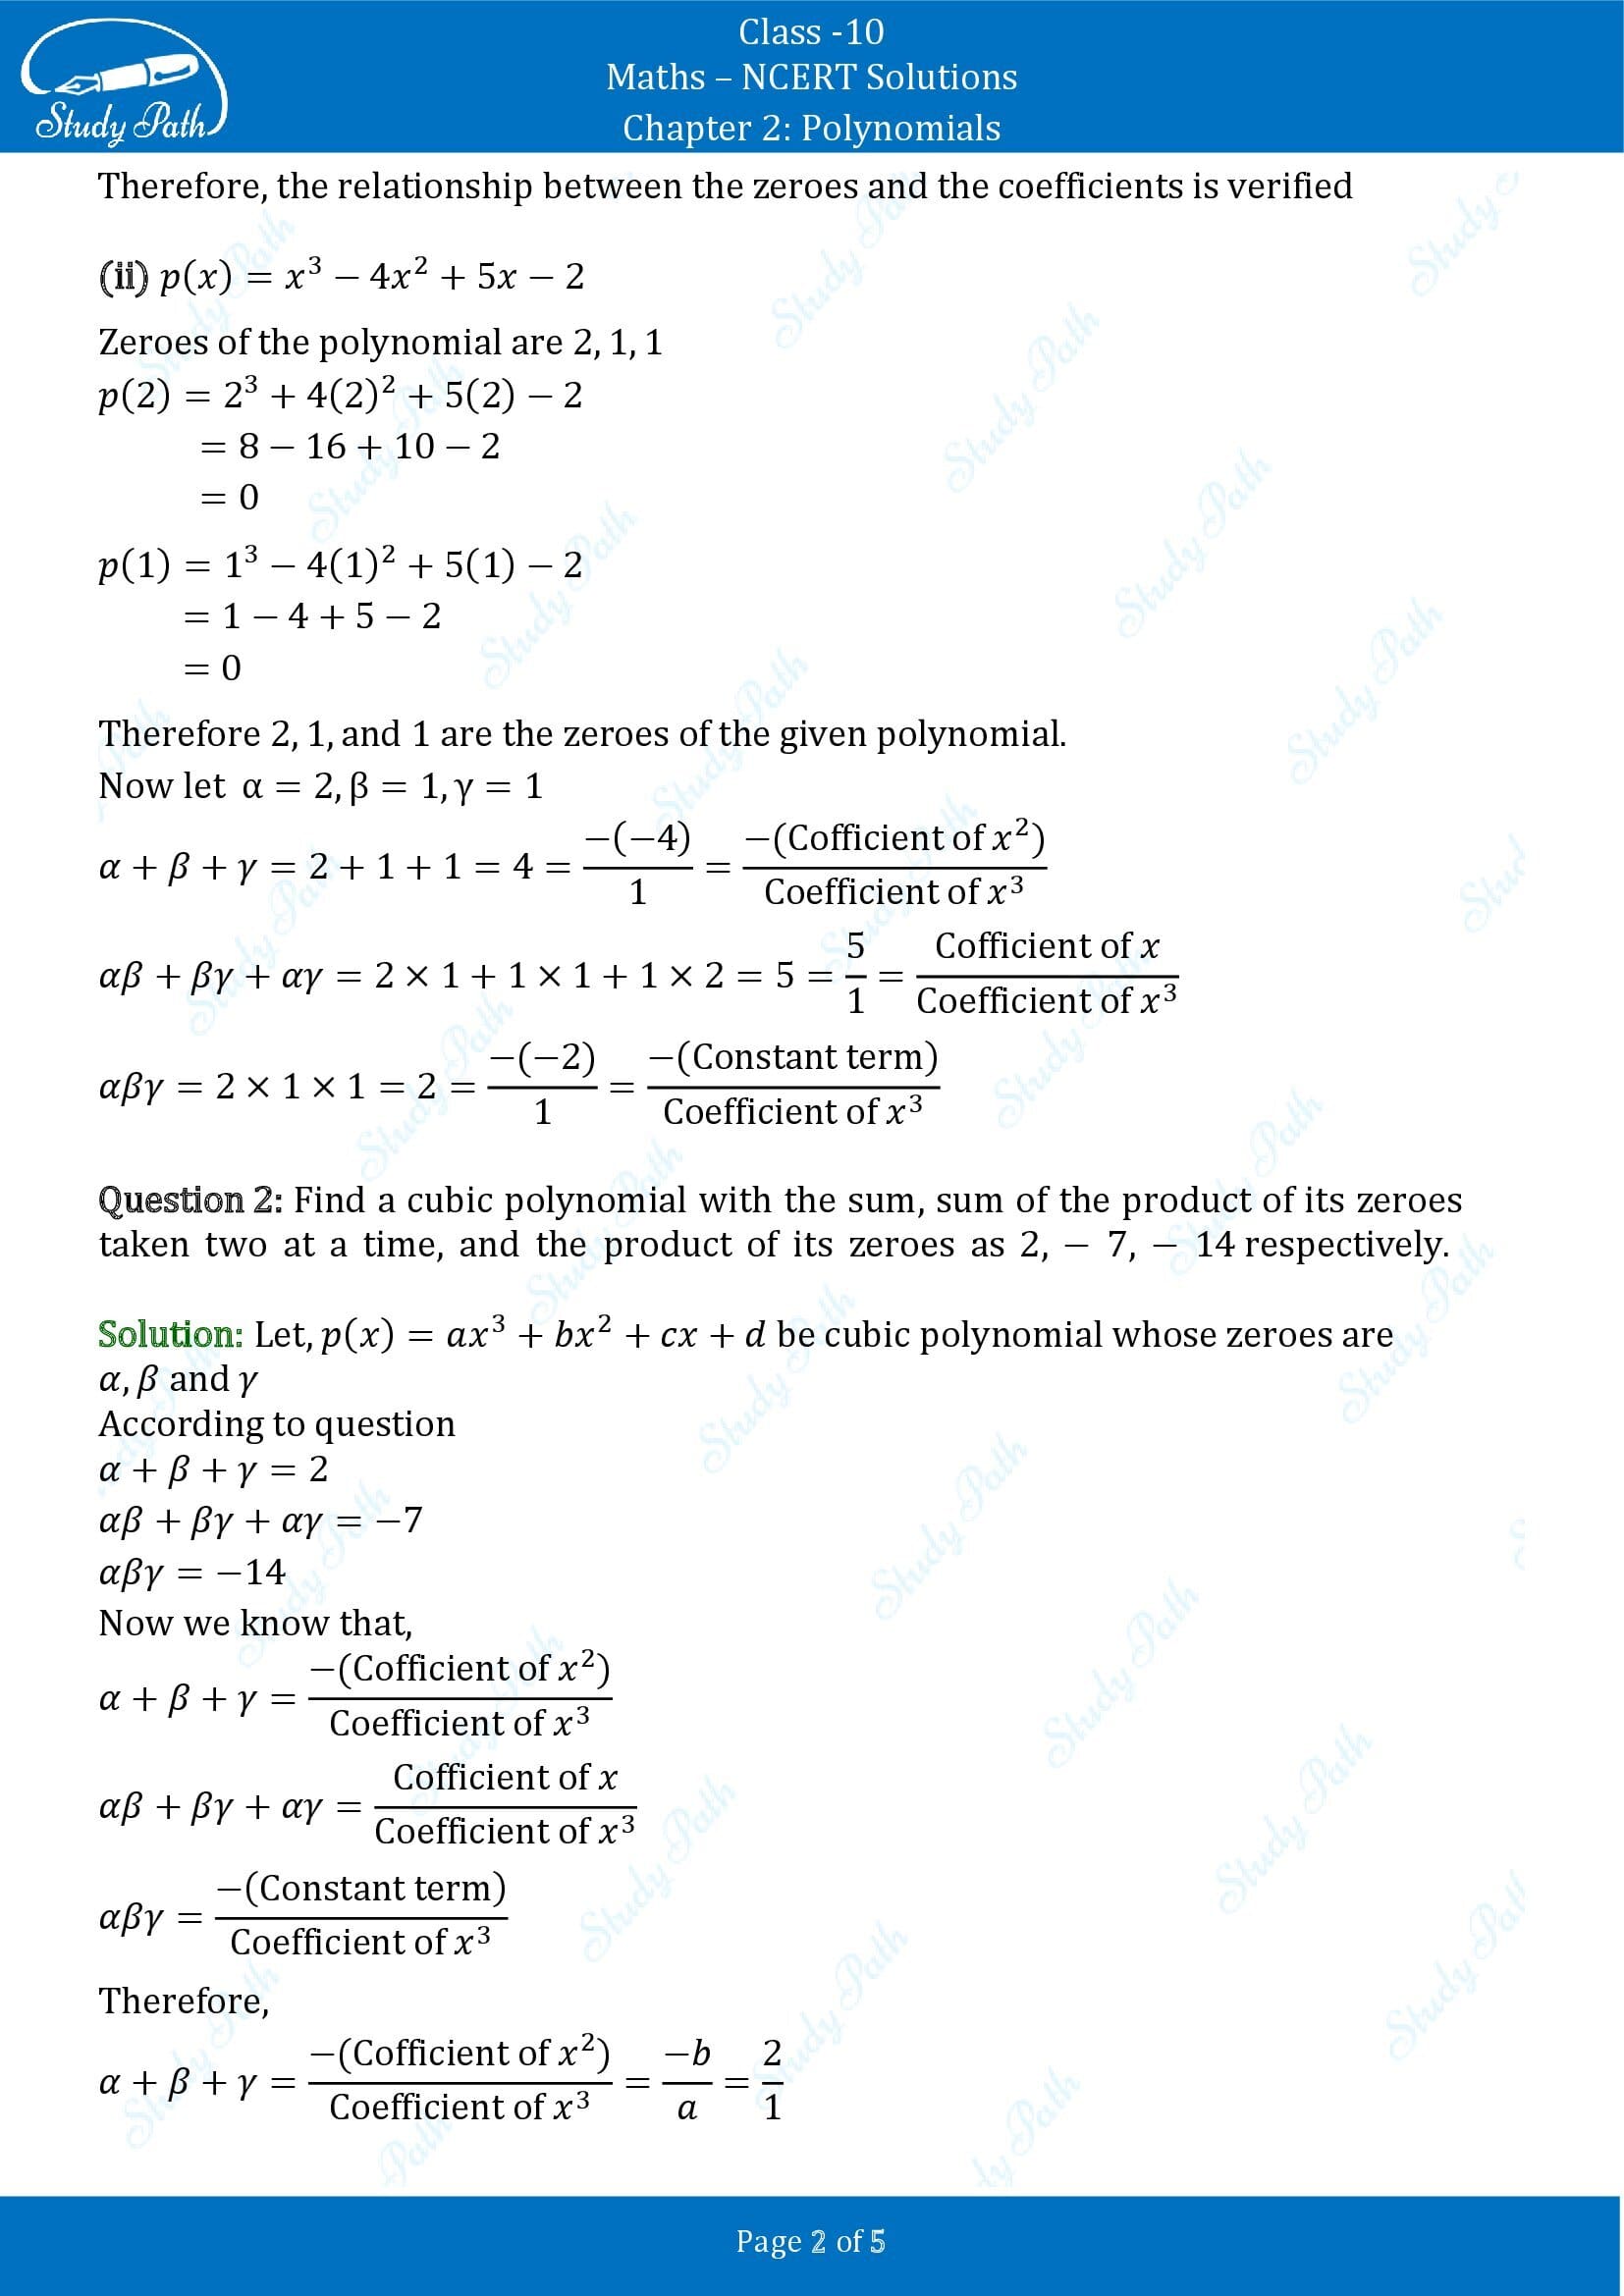 NCERT Solutions for Class 10 Maths Chapter 2 Polynomials Exercise 2.4 00002